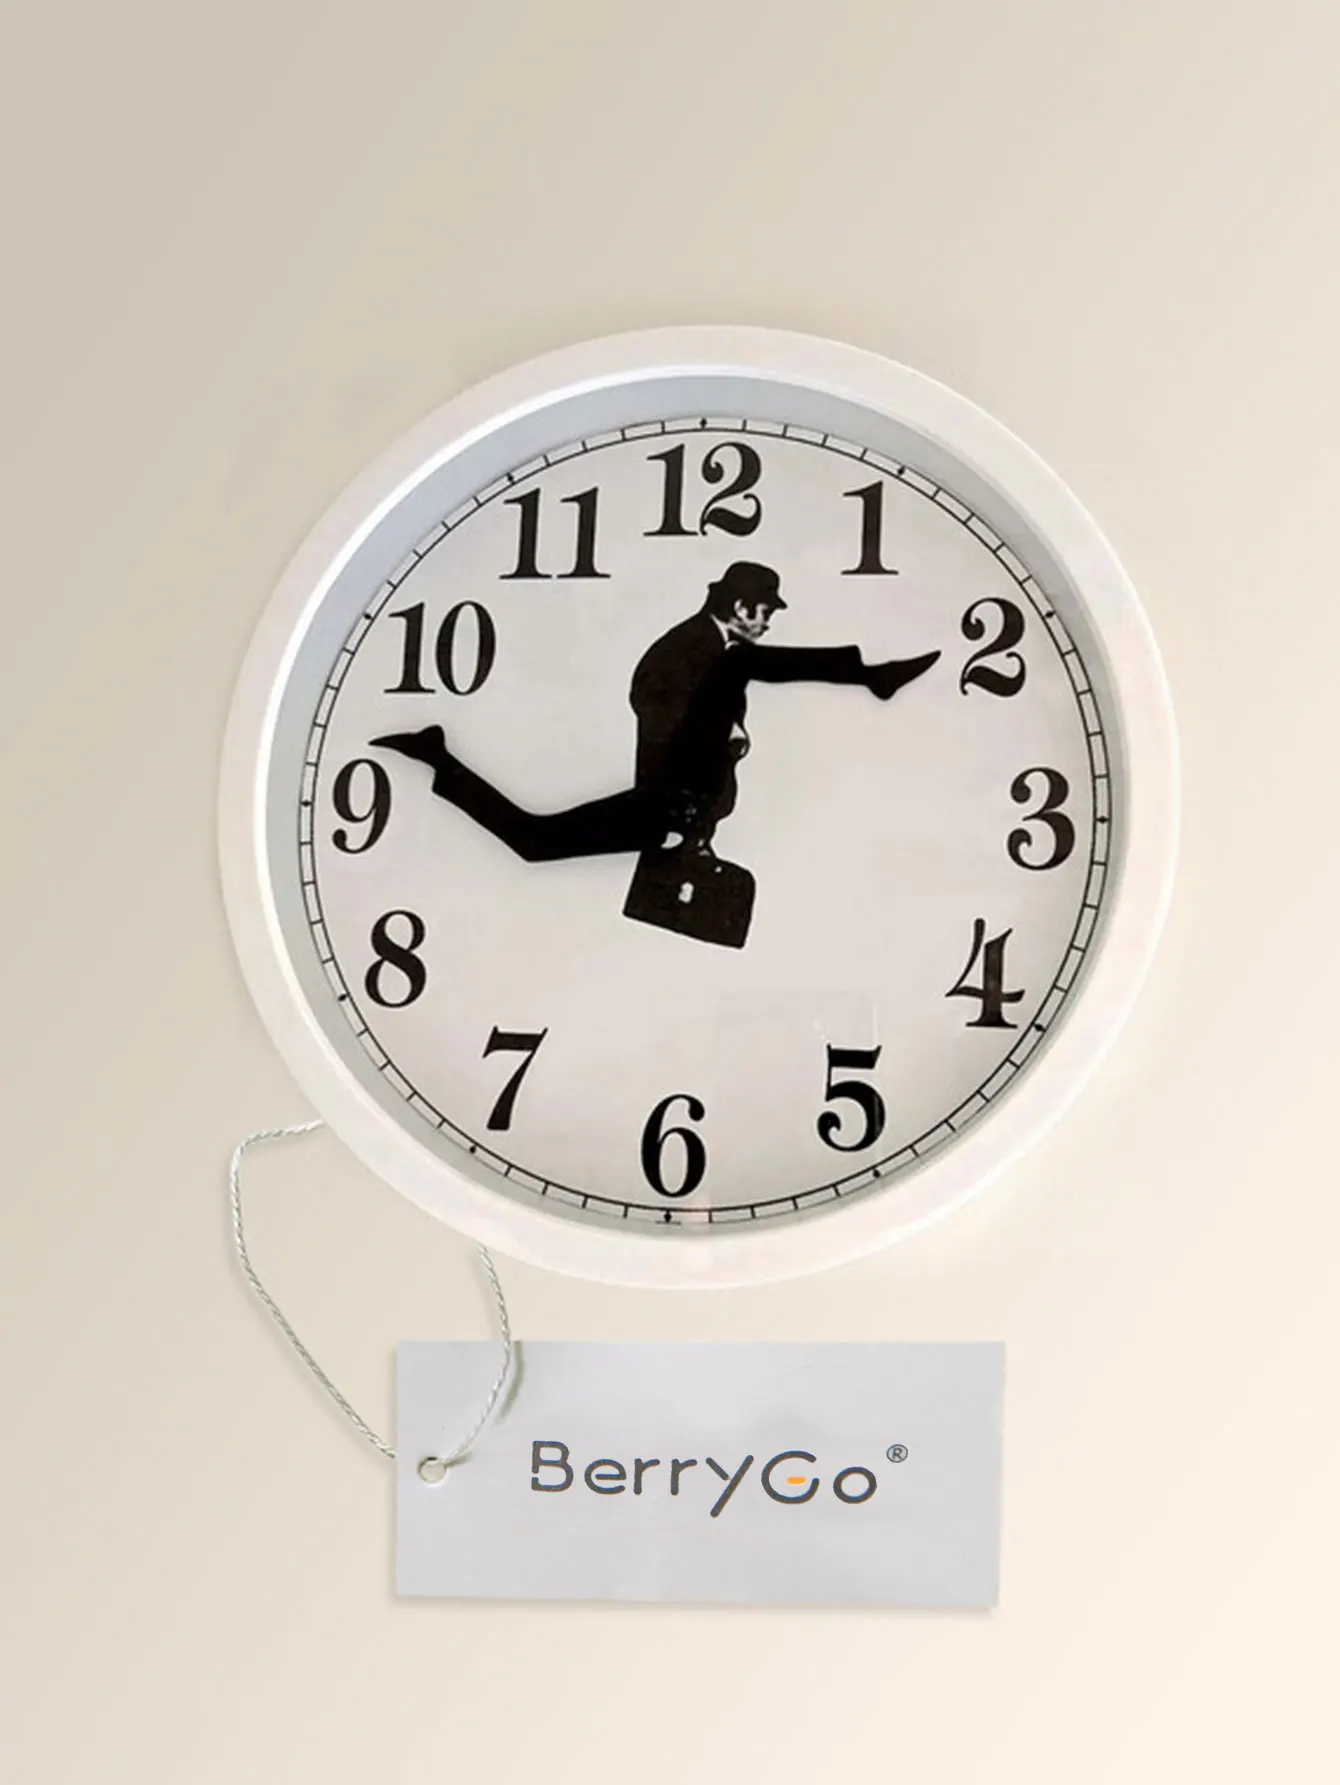 berrygo-ministry-of-silly-walk-wall-clock-comedian-home-decor-novelty-wall-watch-funny-walking-silent-mute-clocks